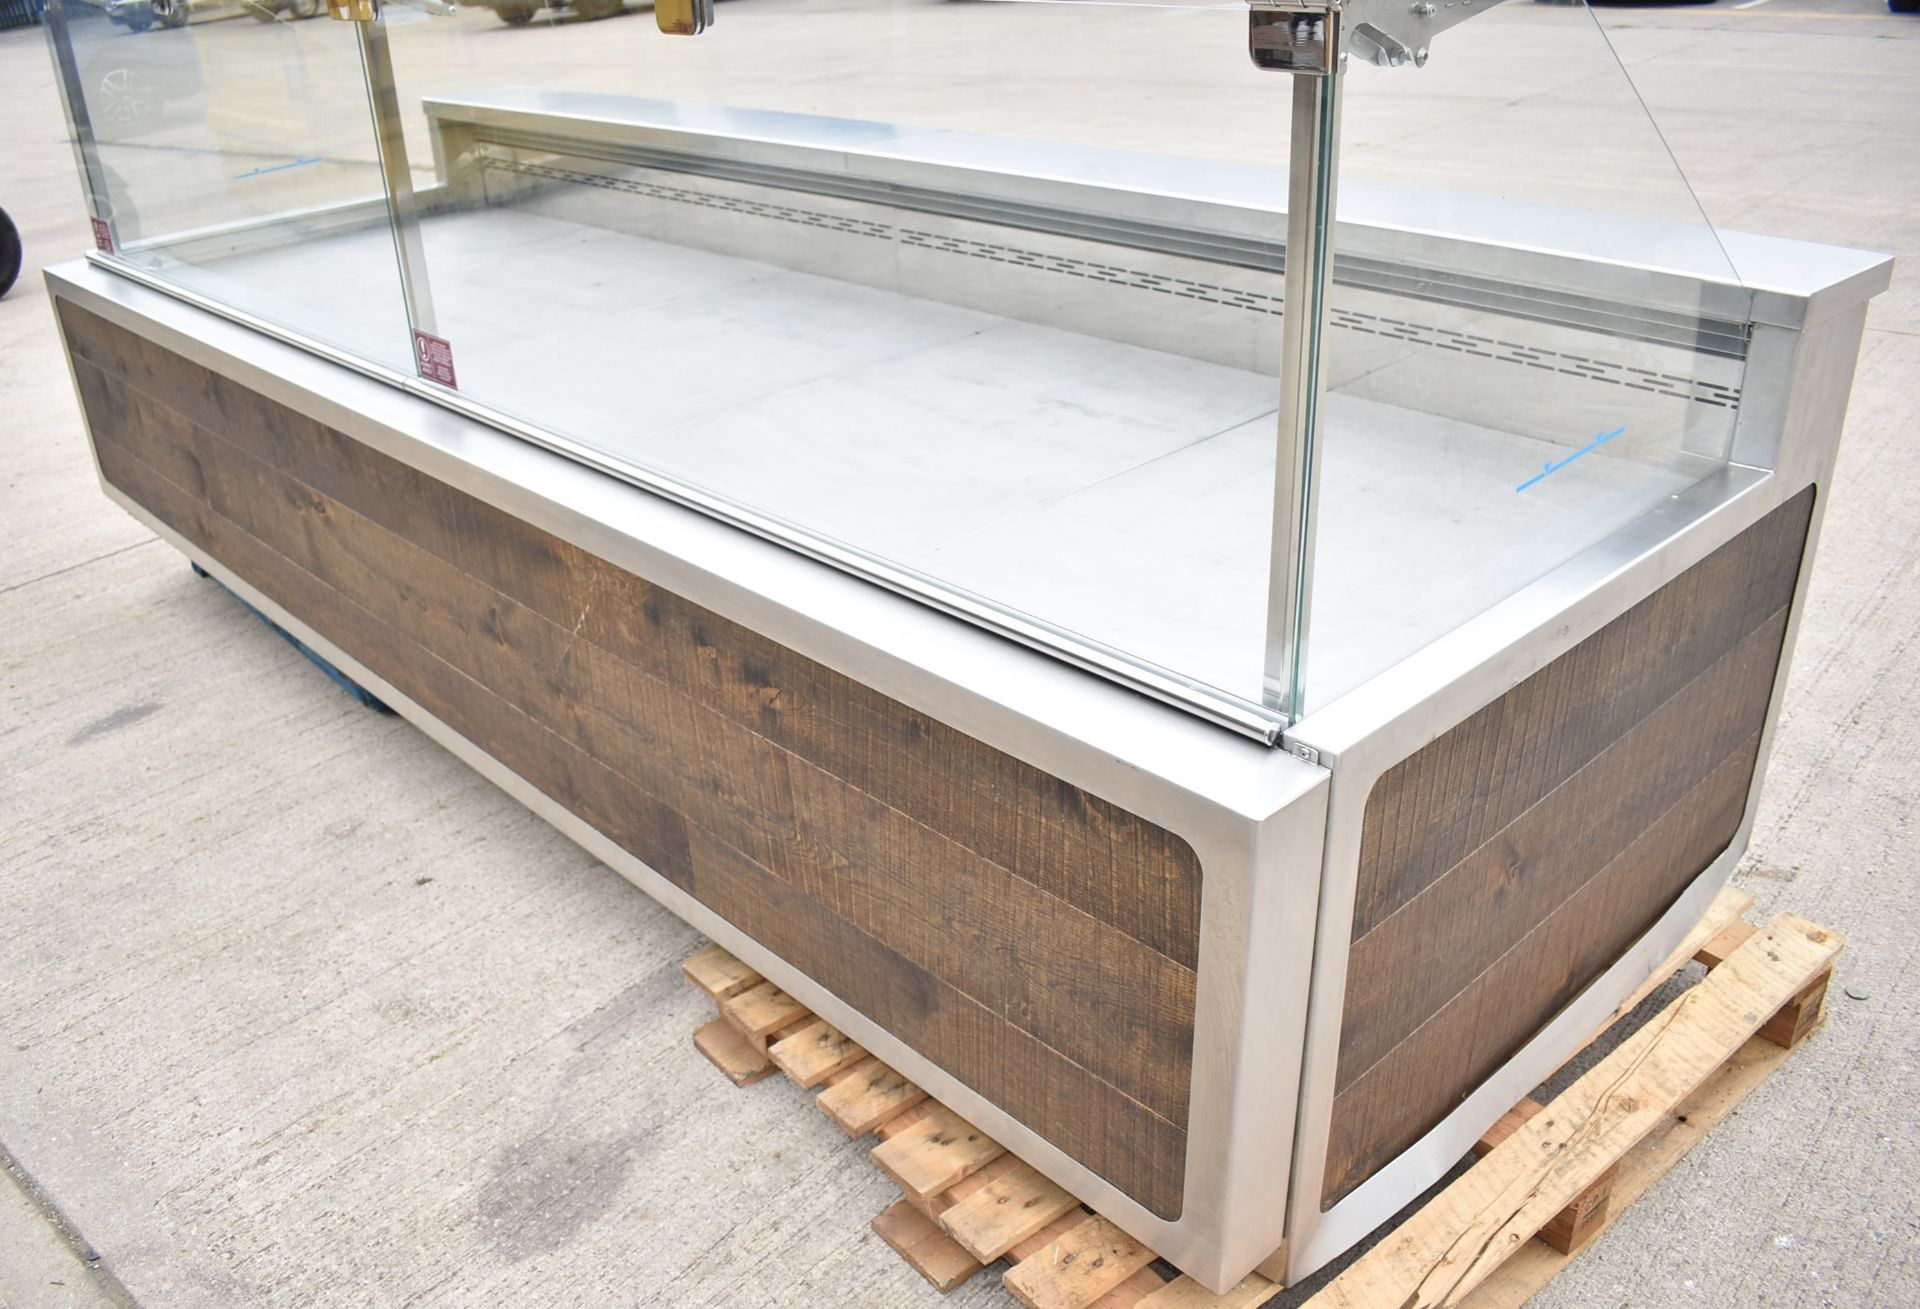 1 x Eurocryor Bistro Refrigerated Retail Counter - Suitable For Takeaways, Butchers, Deli, Cake - Image 14 of 28